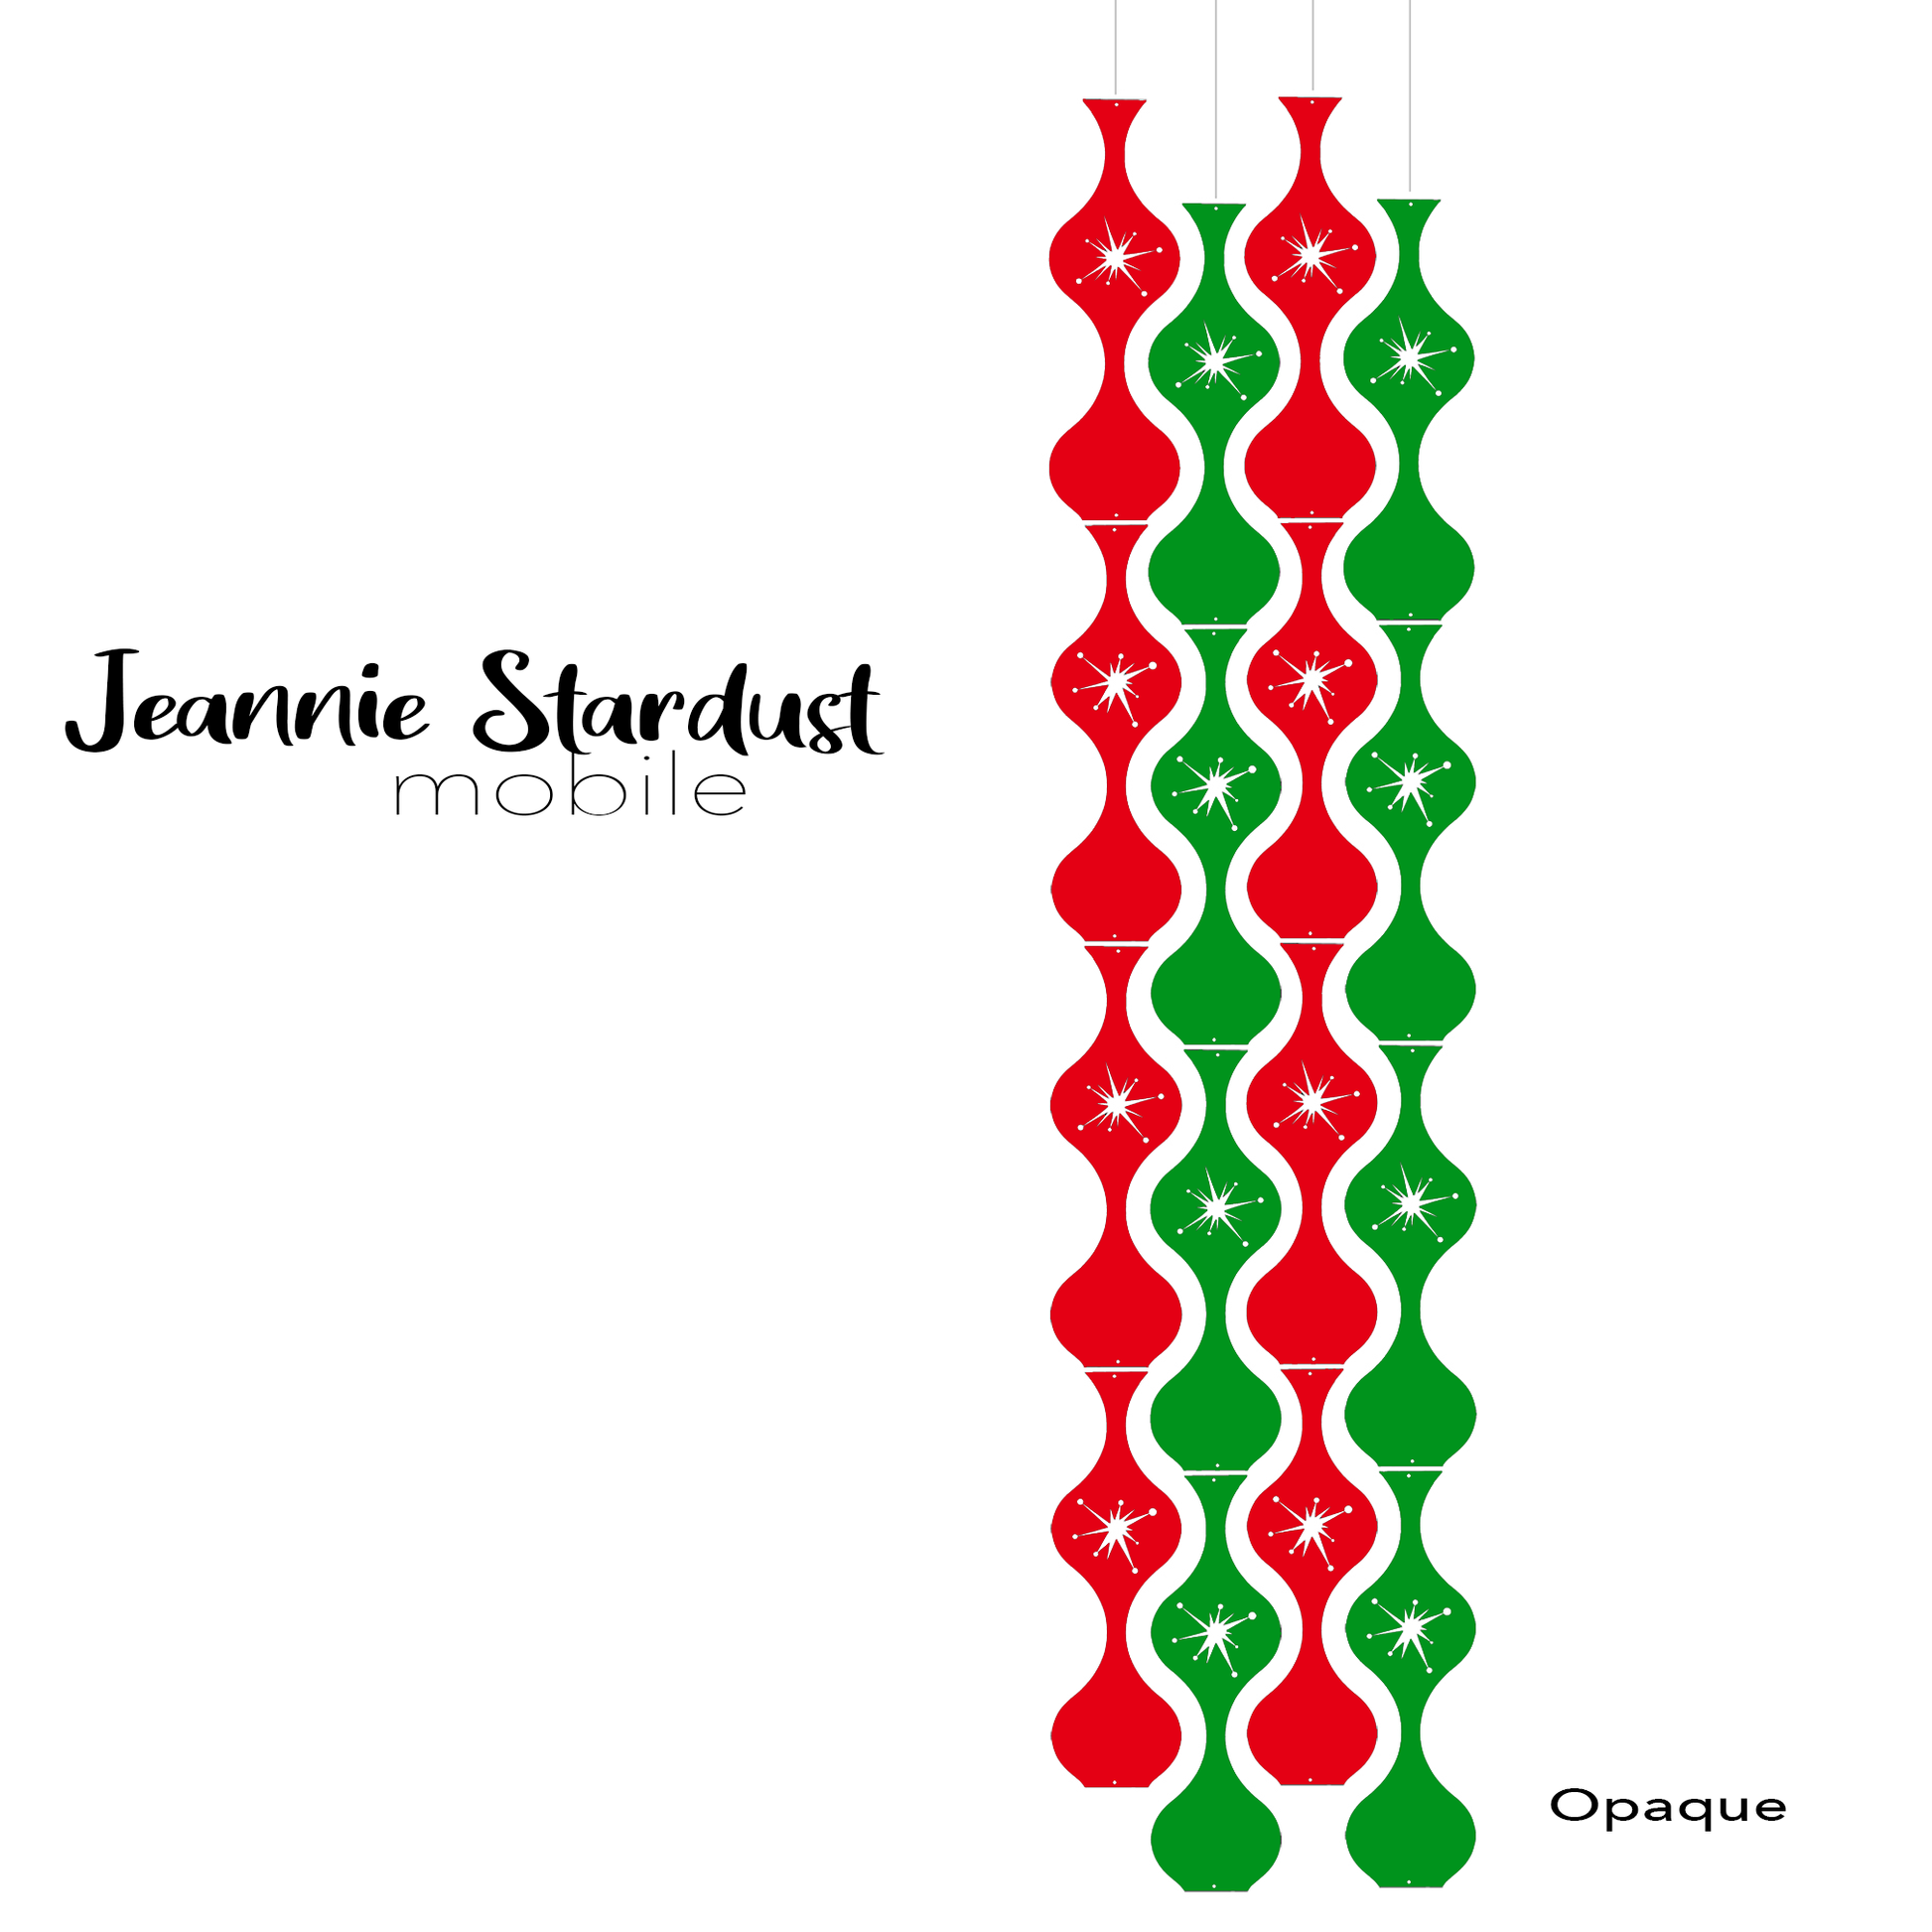 Jeannie Stardust Opaque Red and Green Acrylic Mobile - DIY Kit - Featuring Starburst cutouts in the parts by AtomicMobiles.com